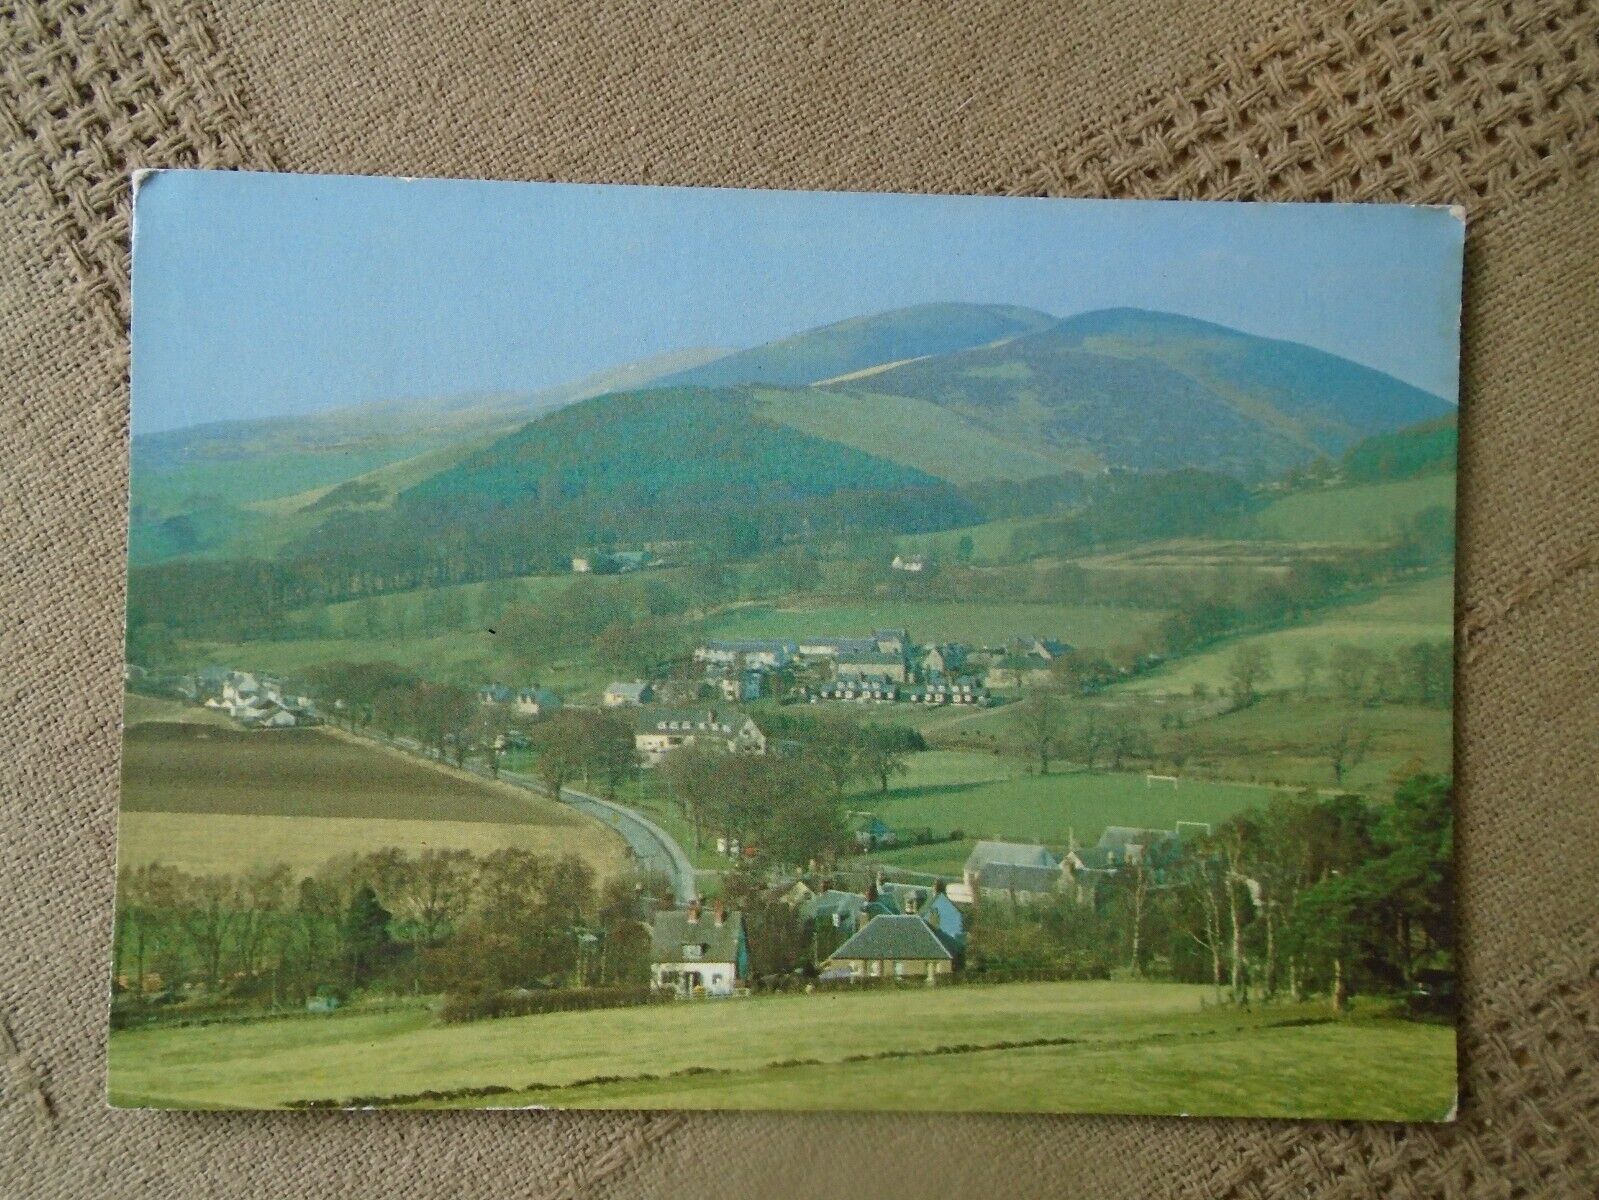 House Clearance - Broughton from Helmend, Scottish Borders, 1983 Braemar Films service